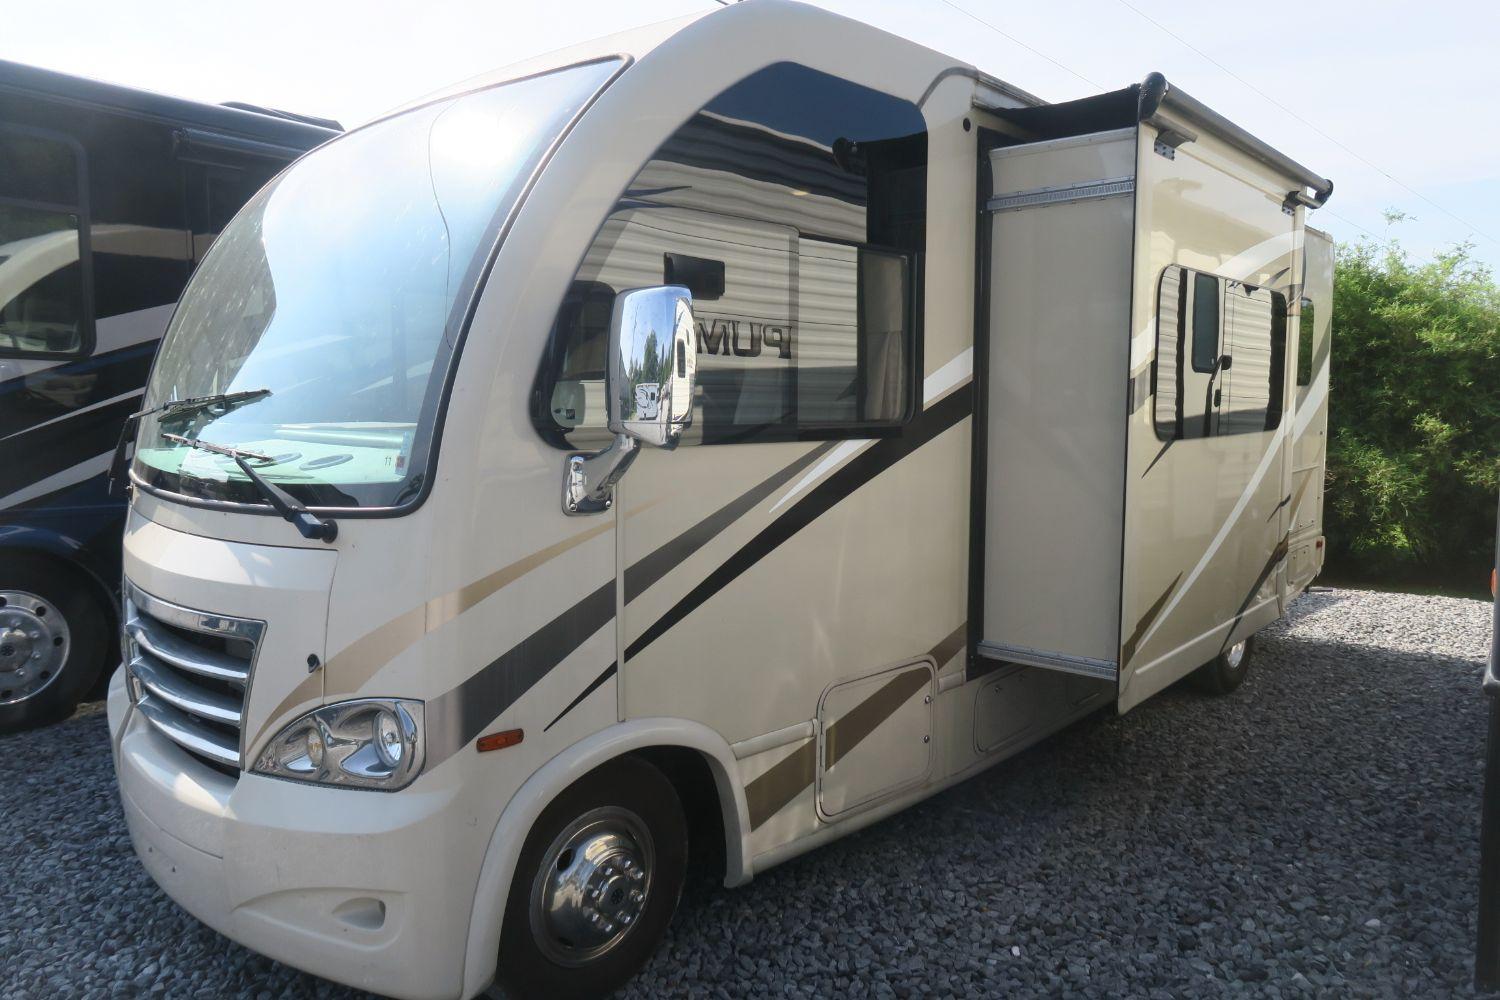 USED 2017 AXIS 24.1 - Overview | Berryland Campers